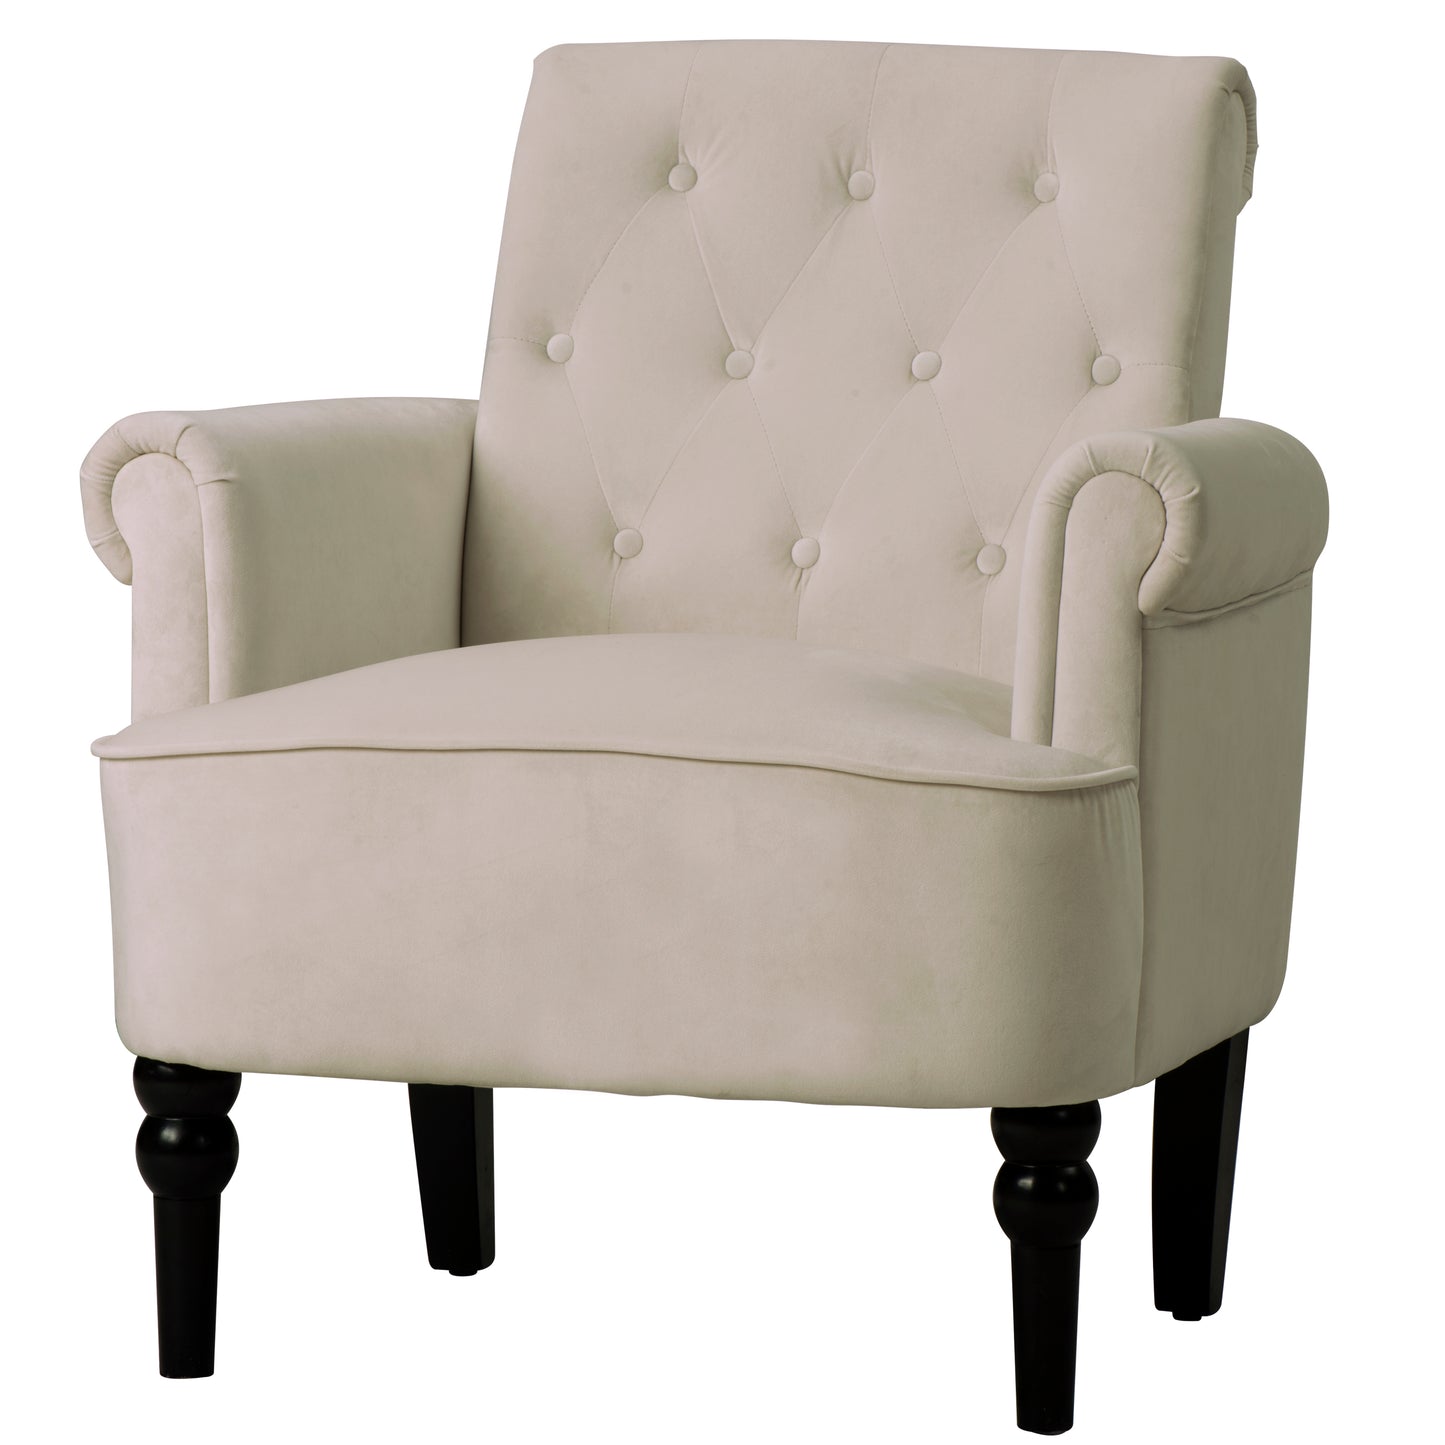 Elegant Button Tufted Club Chair Accent Armchairs Roll Arm Living Room Cushion with Wooden Legs, Off White